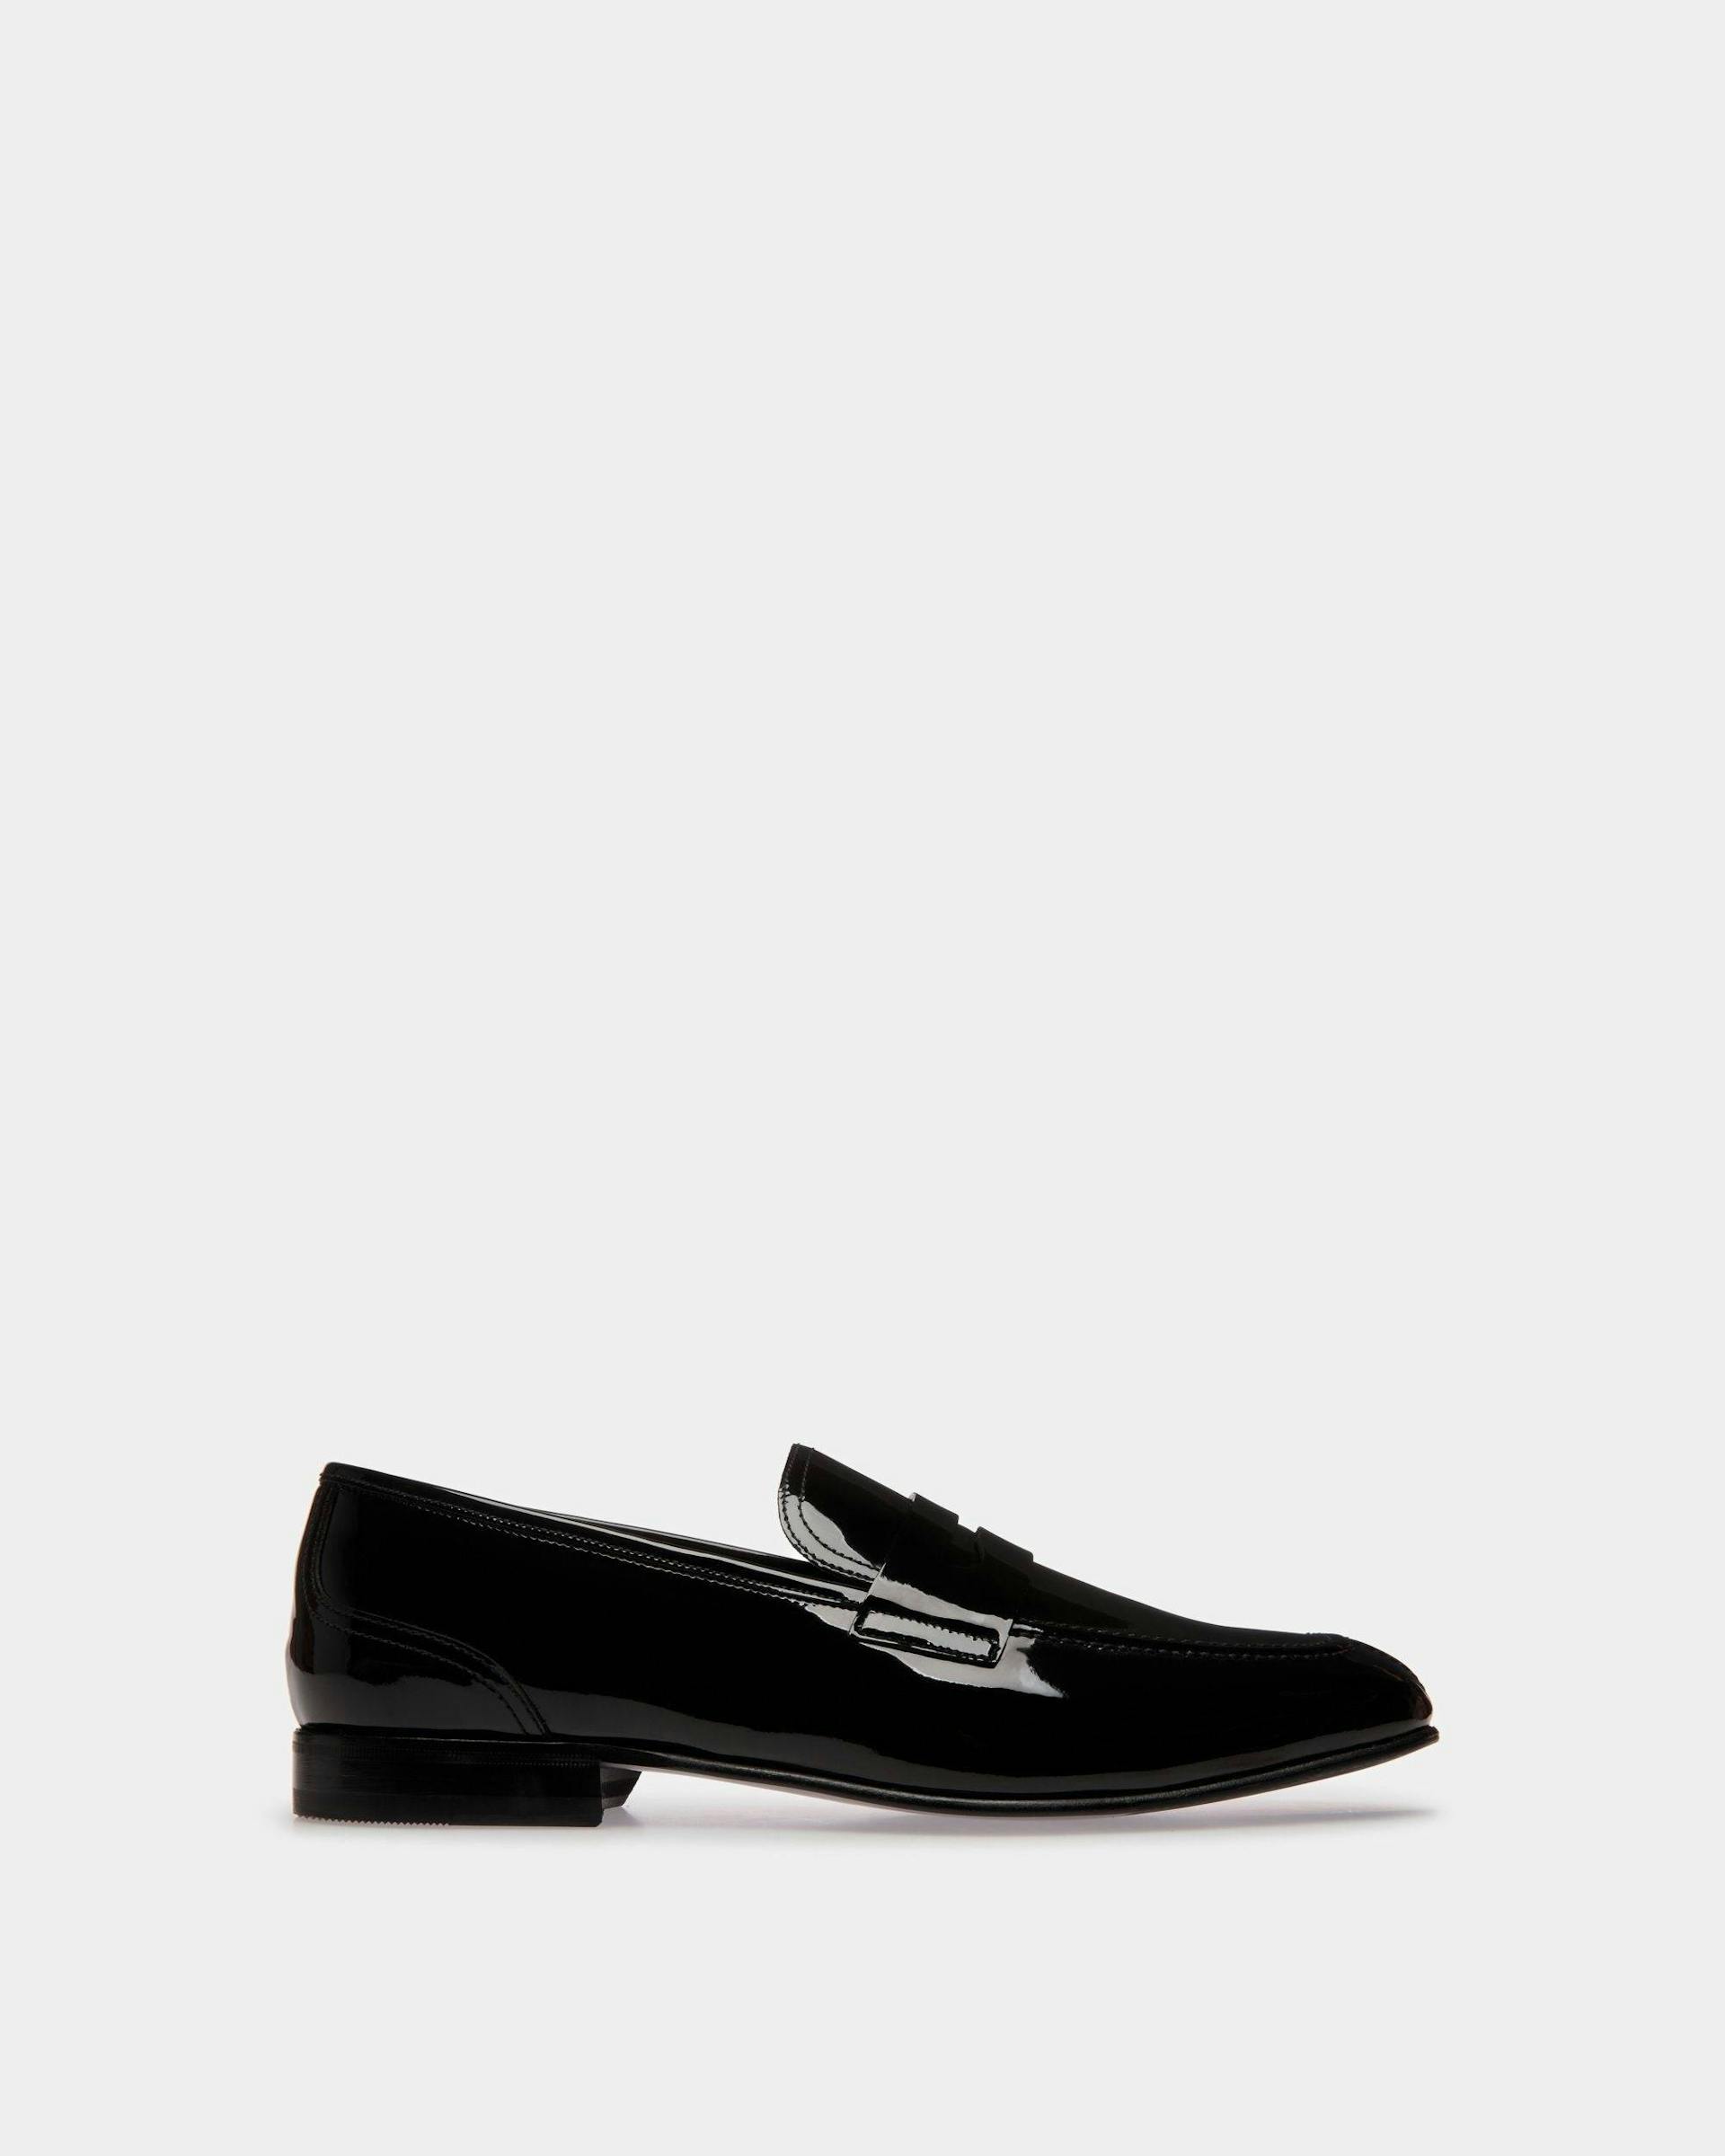 Suisse Loafer in Black Patent Leather - Men's - Bally - 01